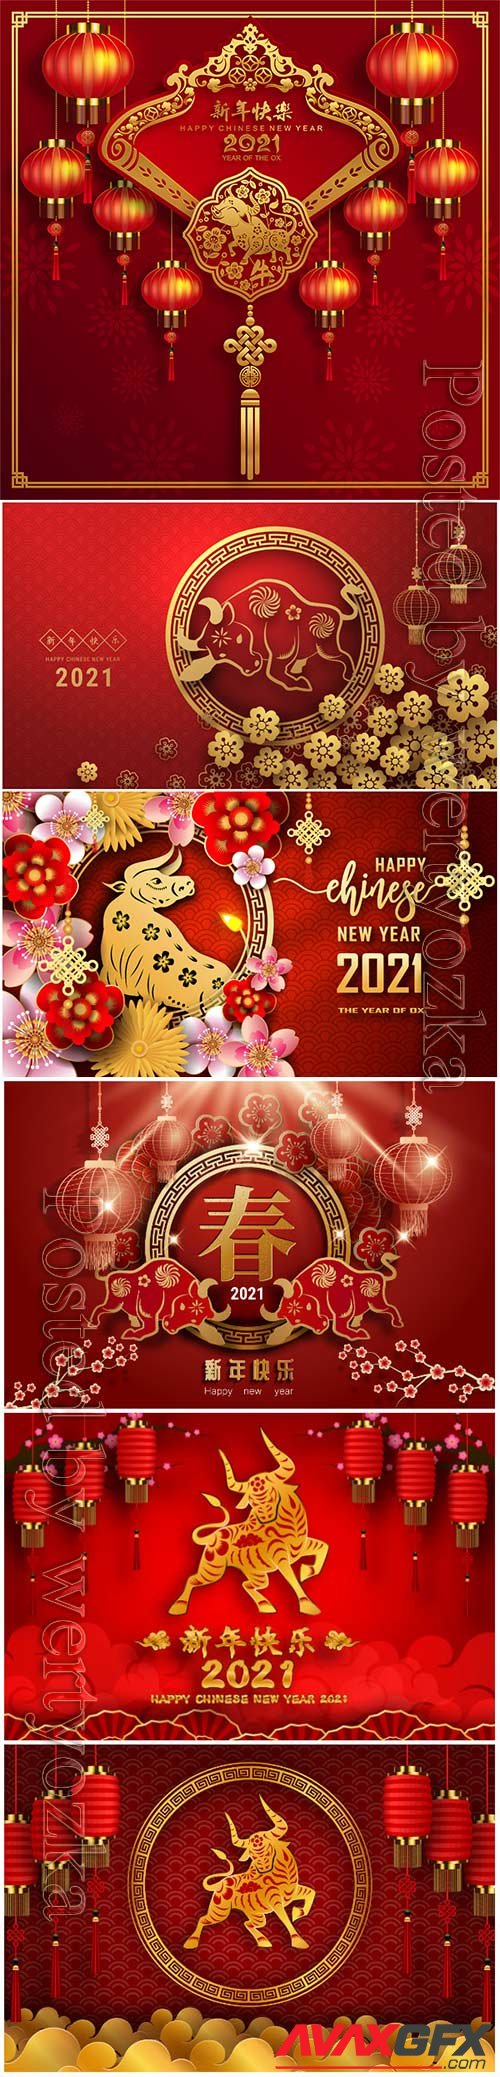 Chinese new year 2021 vector